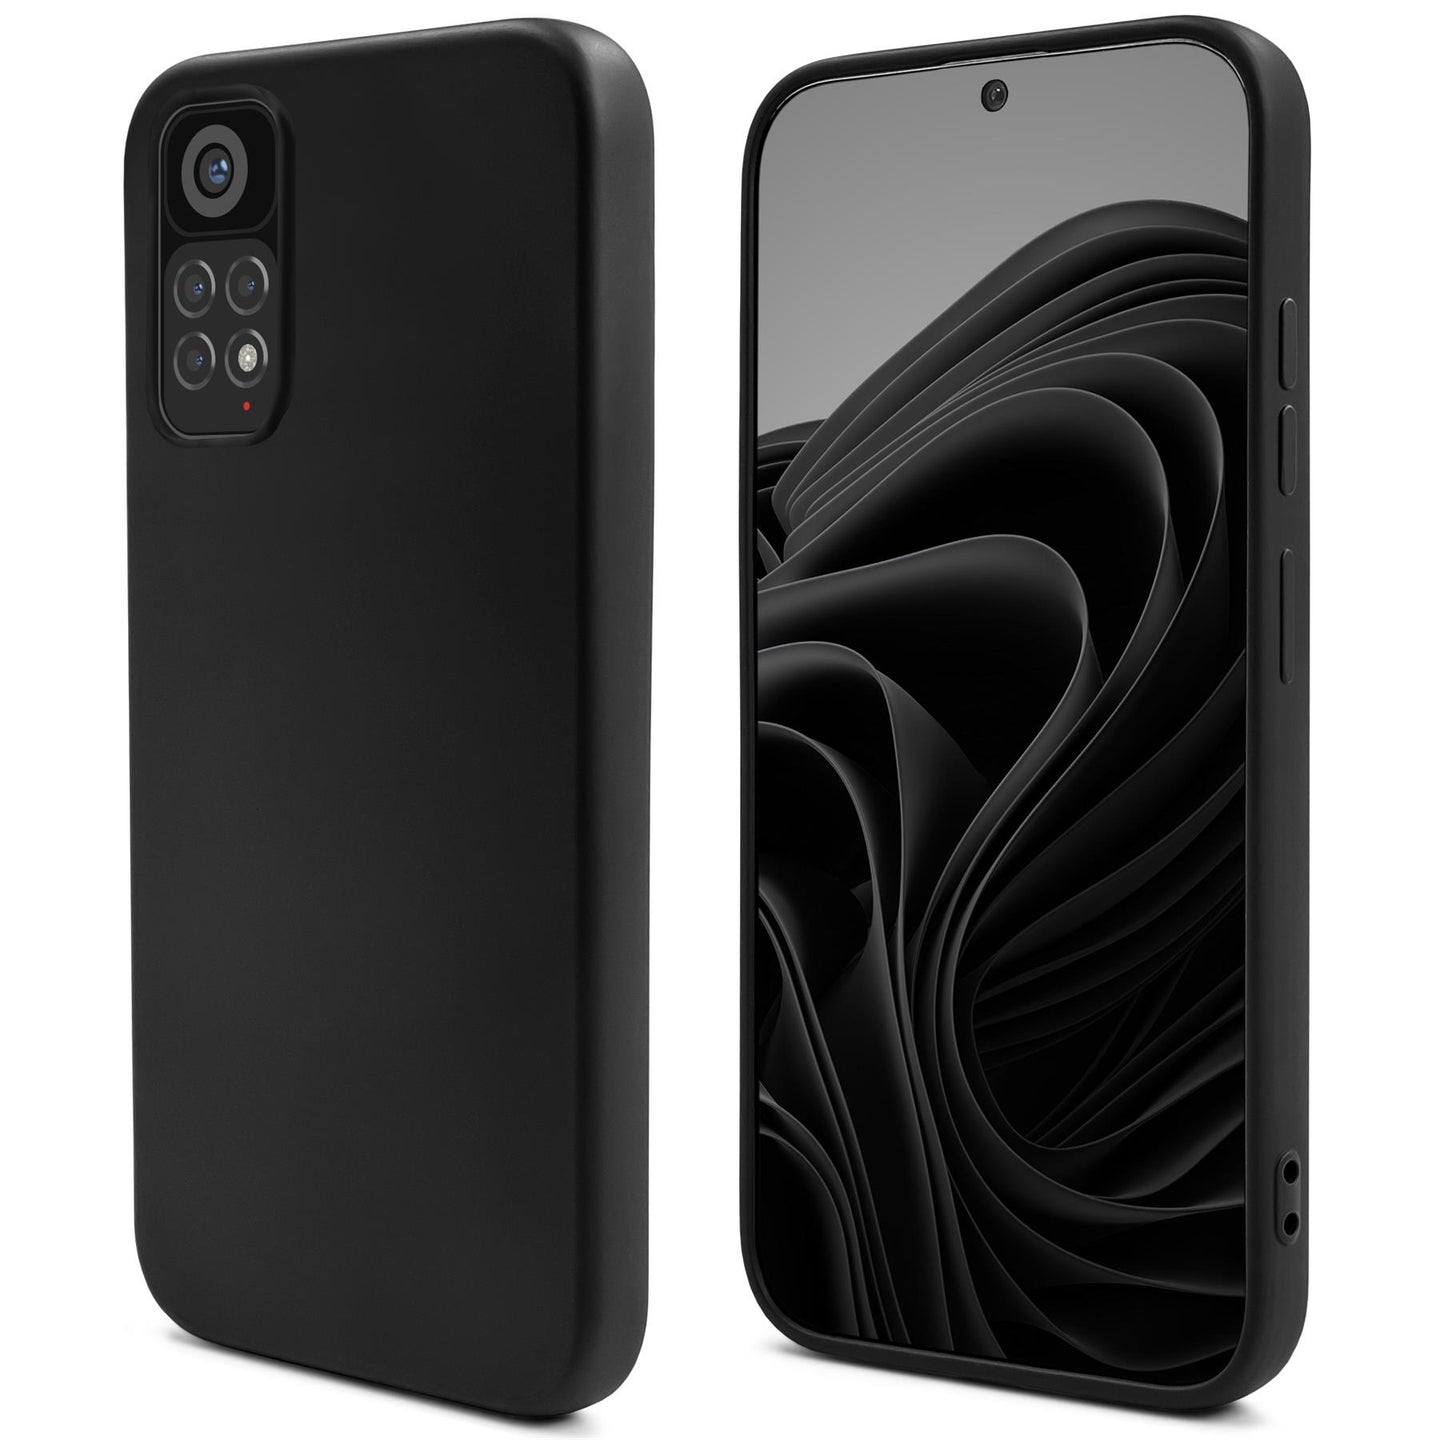 Moozy Lifestyle. Silicone Case for Xiaomi Redmi Note 11 Pro 5G and 4G, Black - Liquid Silicone Lightweight Cover with Matte Finish and Soft Microfiber Lining, Premium Silicone Case